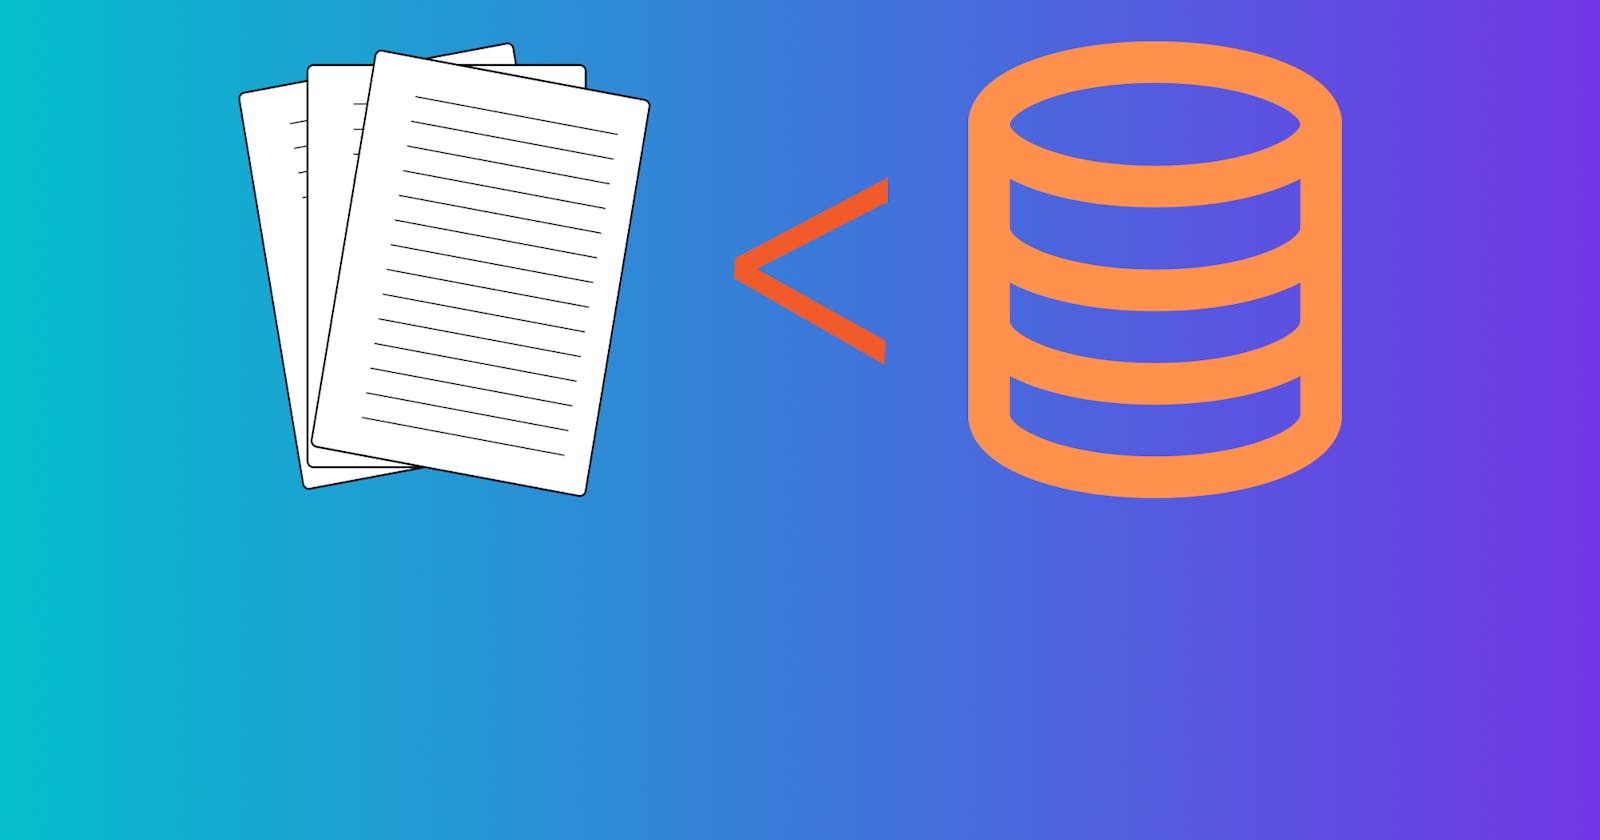 “From File Folders to Super-Charged Spreadsheets: Understanding the Basics of Databases”